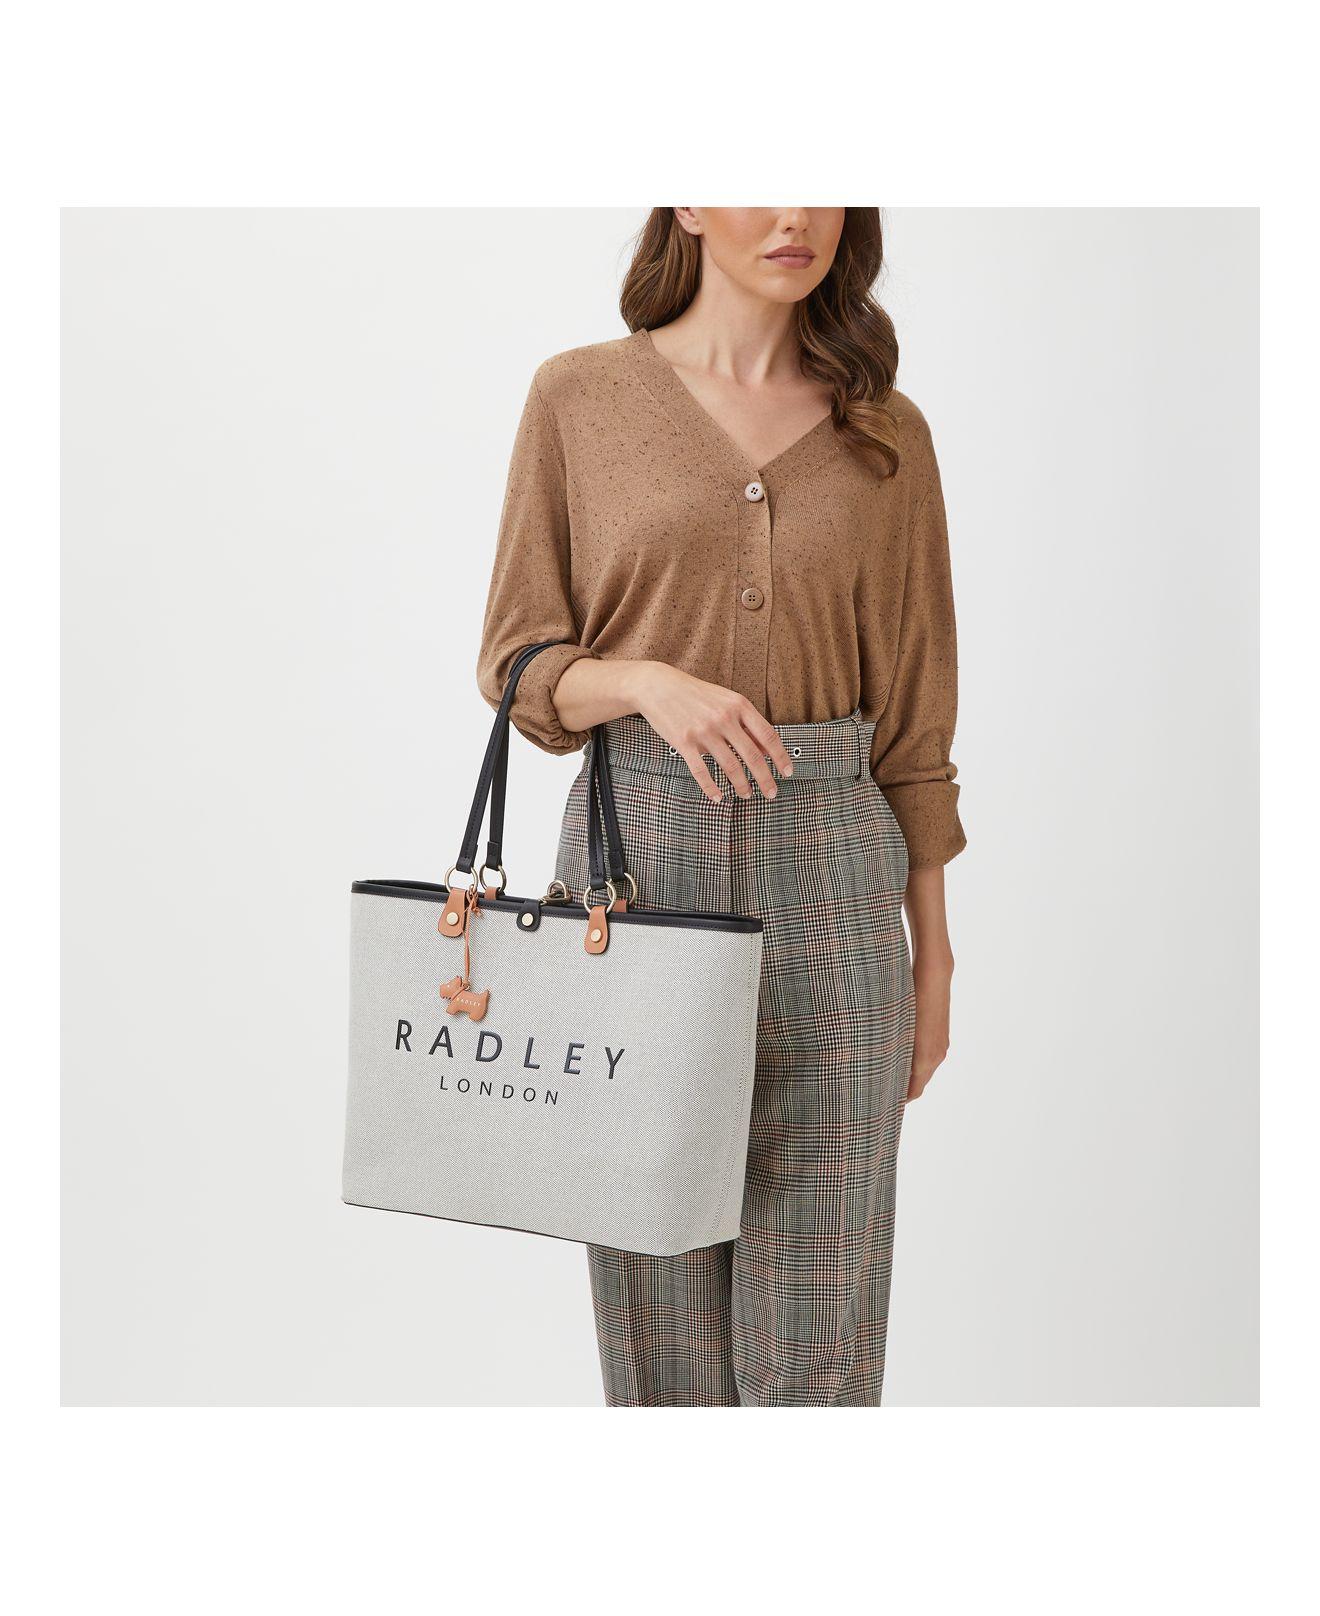 Radley London Evergreen Large Open Top Tote